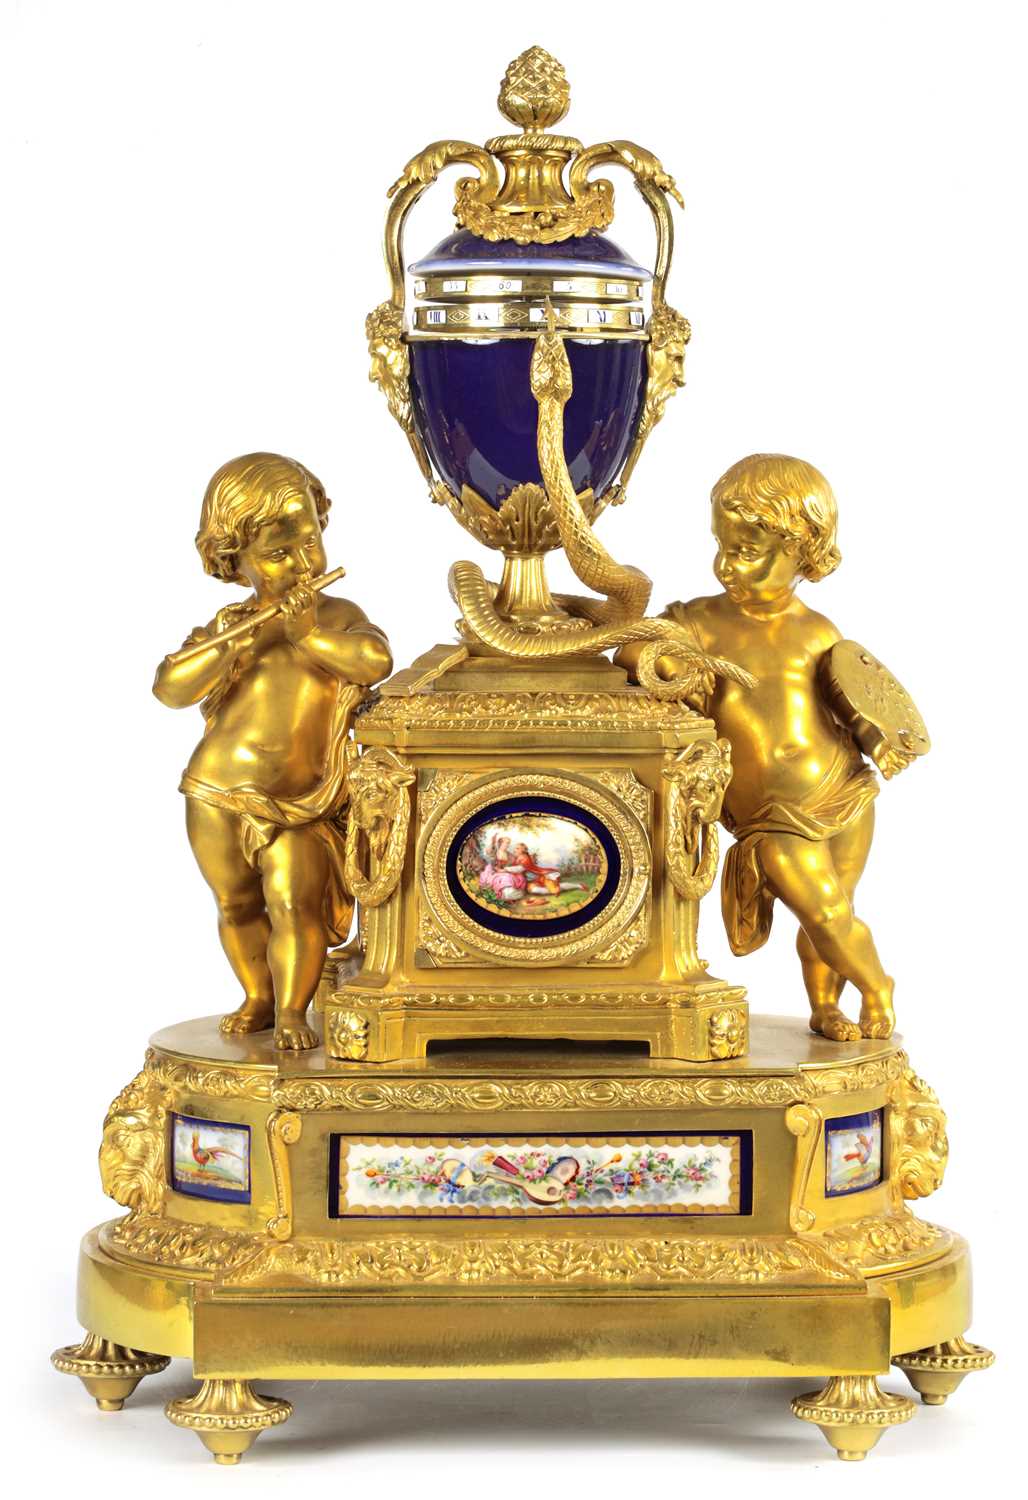 Lot 17 - A FINE MID 19TH FRENCH ORMOLU AND 'SEVRES' PORCELAIN MOUNTED REVOLVING URN CLOCK